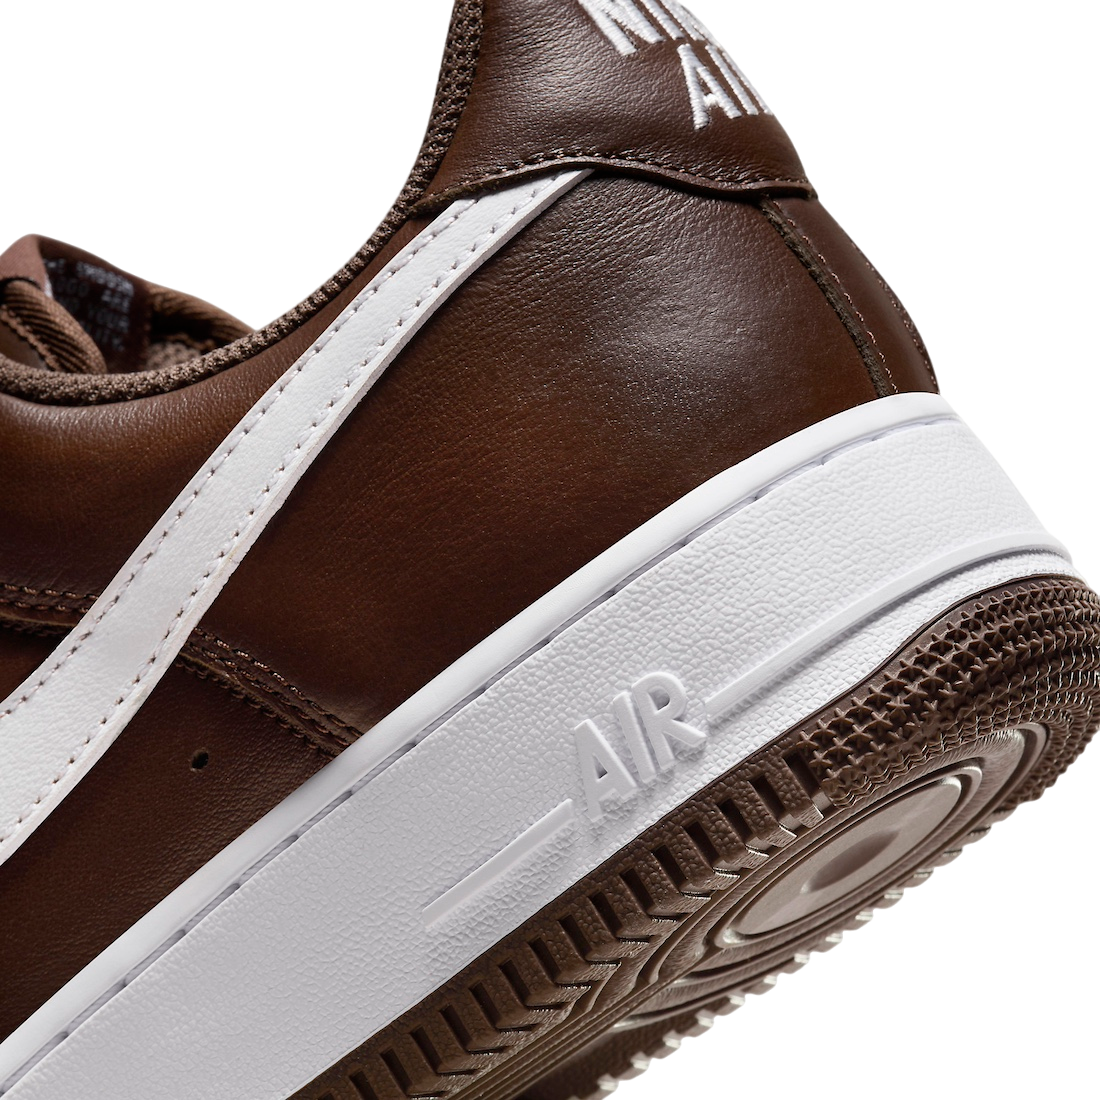 Nike Air Force 1 Low Chocolate FD7039-200